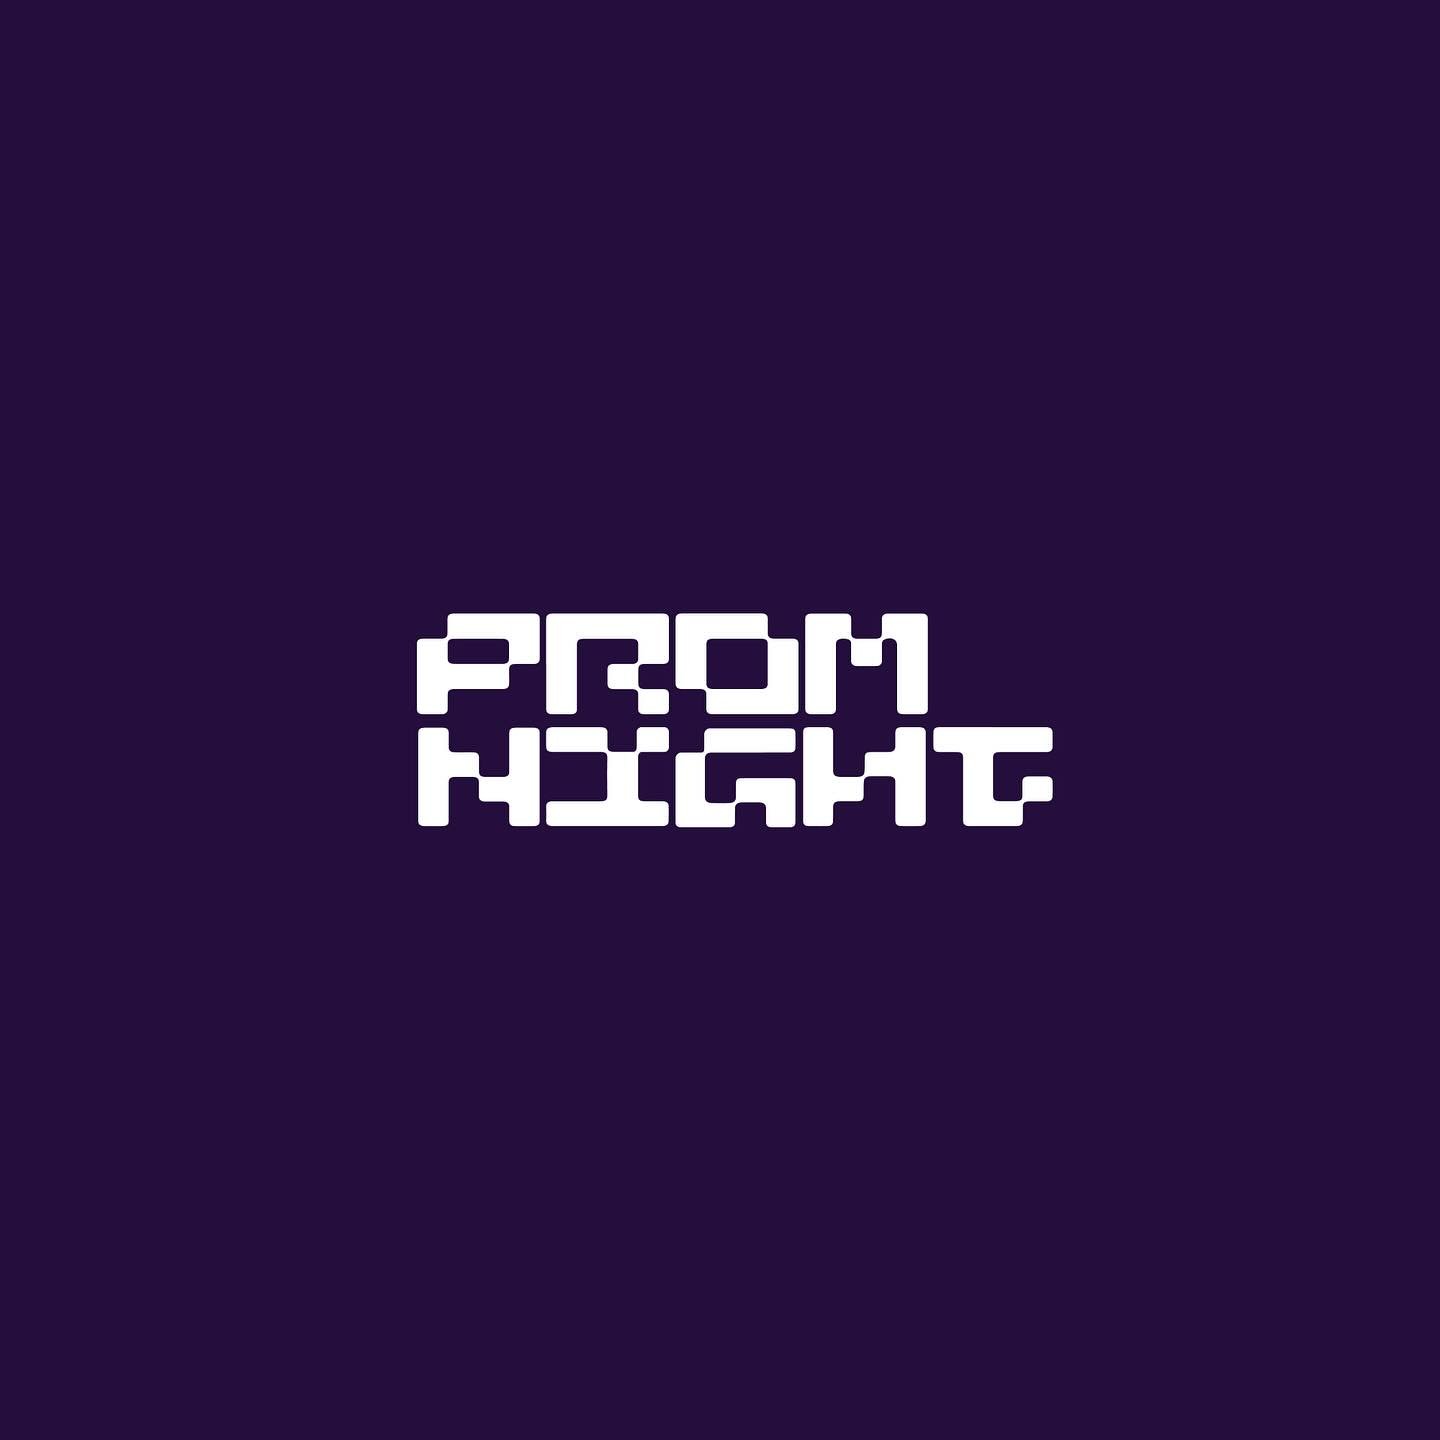 PromNight, a leader in orchestrating unforgettable prom experiences for over 25 years, brought us on to create a set of designs for their 2024 event. Our team developed a galaxy-inspired theme, employing vibrant gradients and holographic details acro